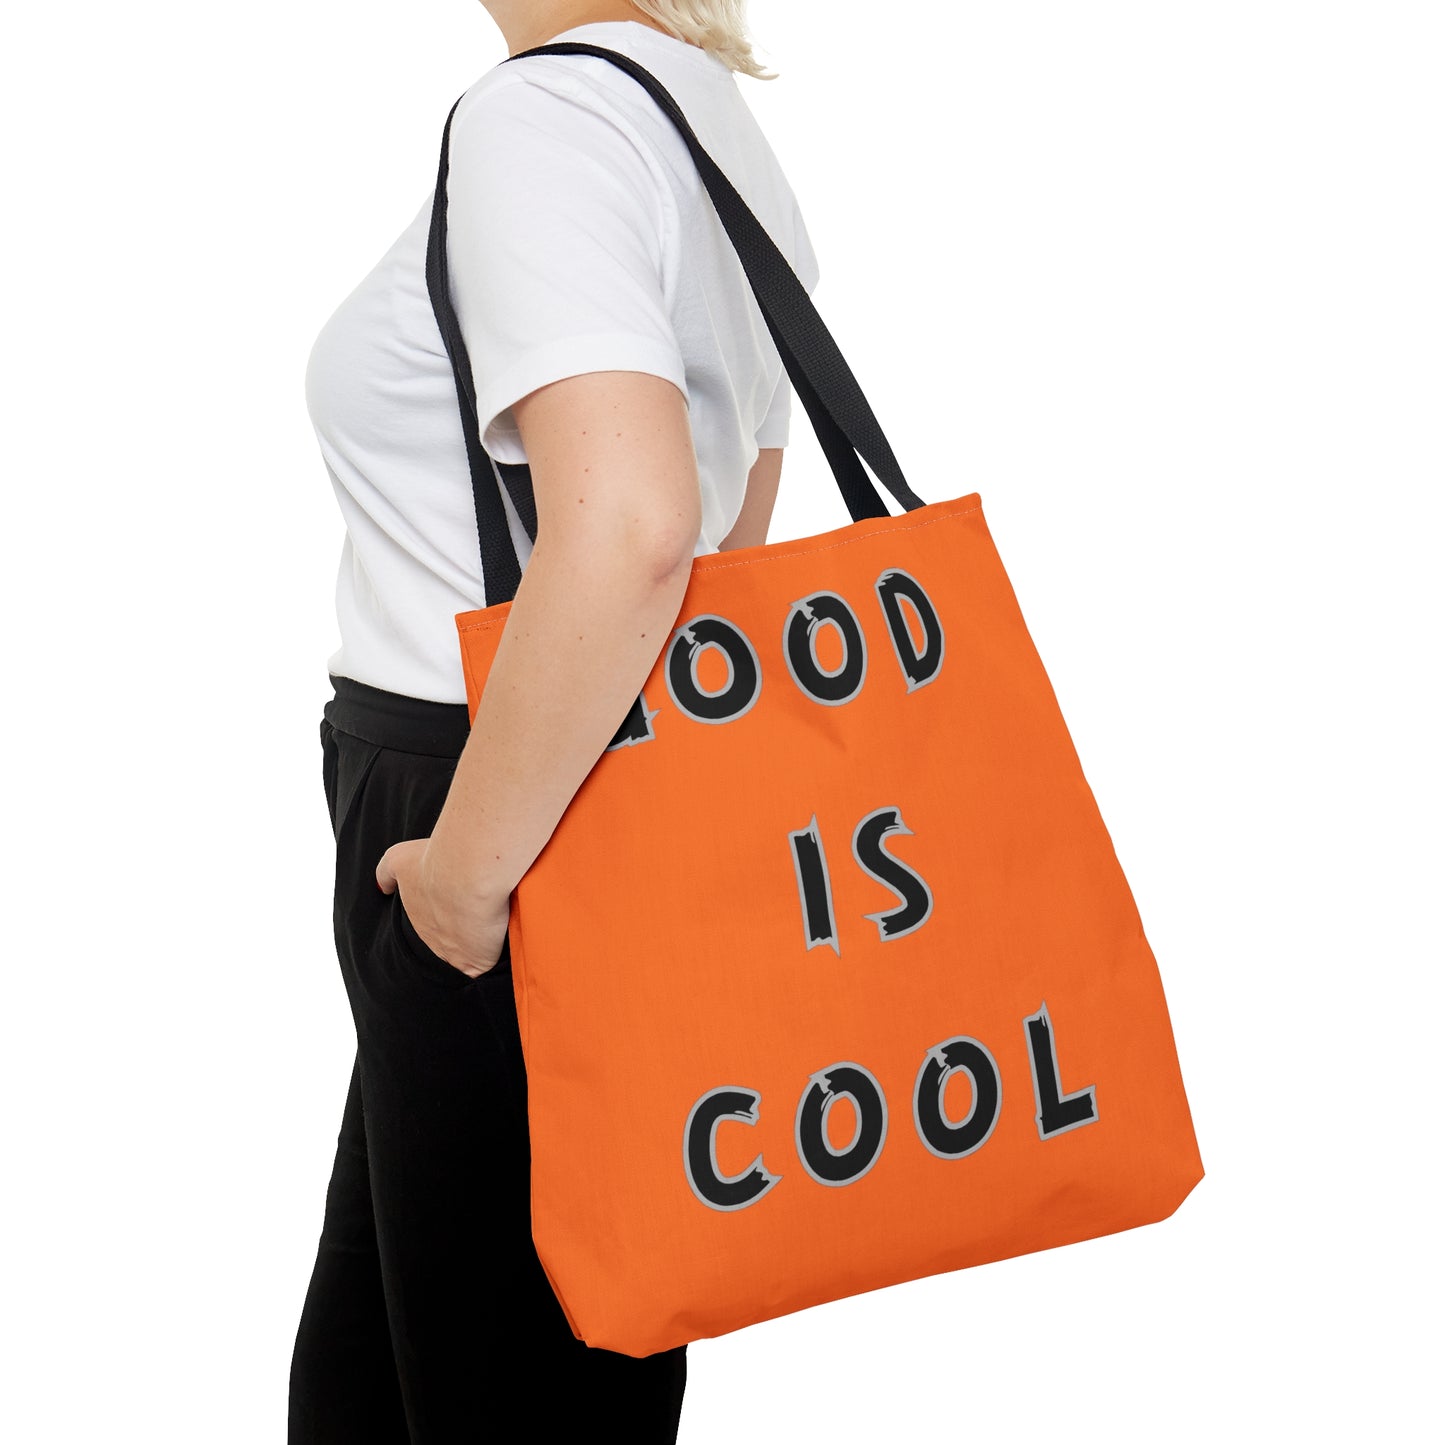 GOOD IS COOL printed on both sides of this tote bag.Let’s celebrate goodness! Come in 3 sizes to meet your needs.